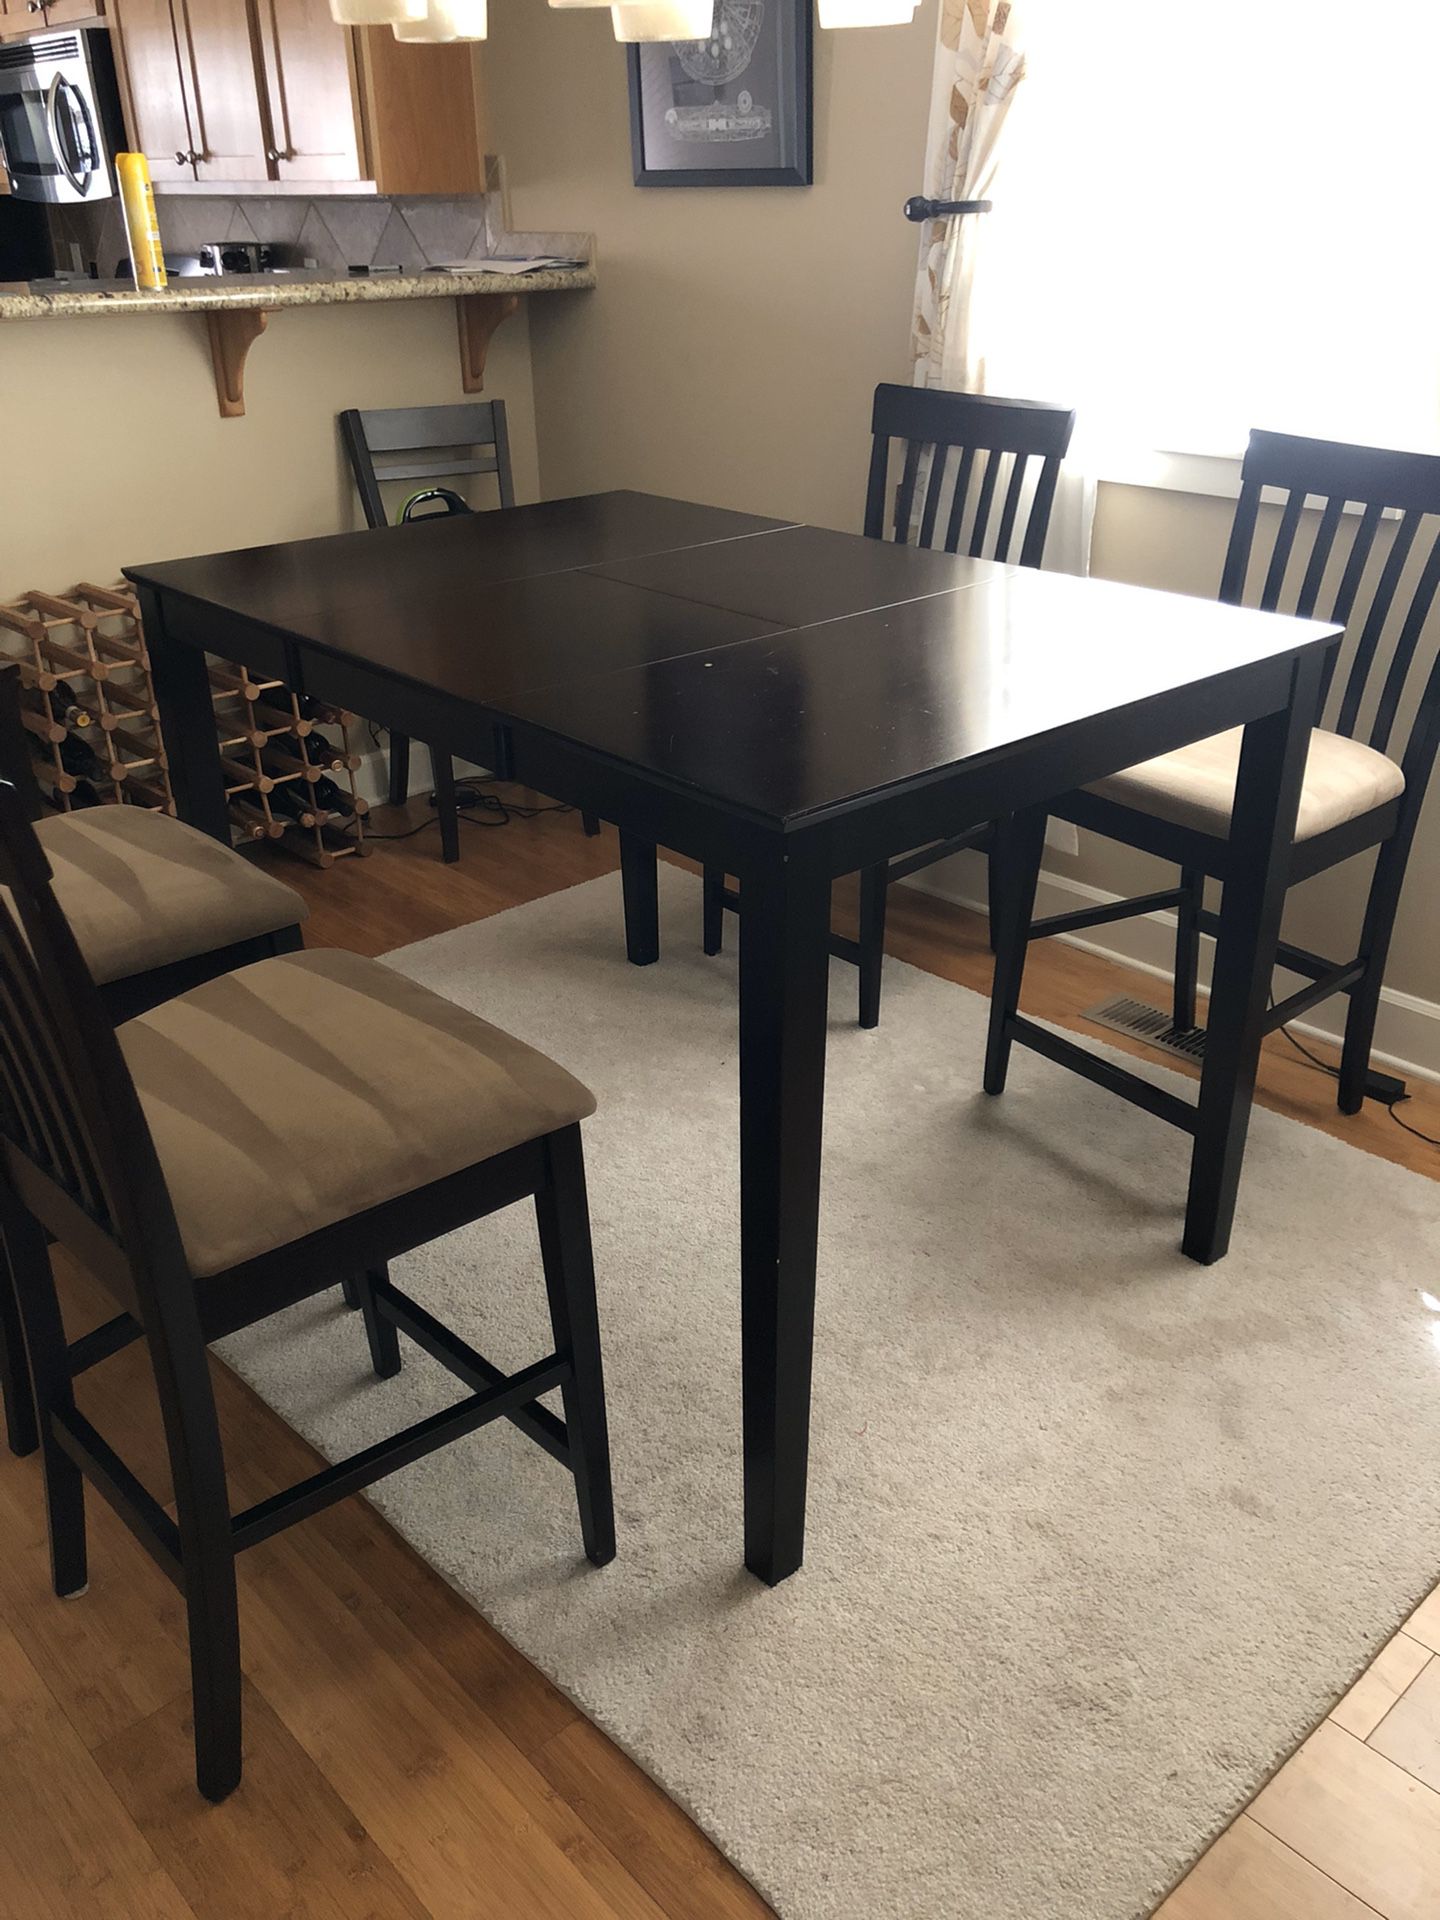 Pub style dining table